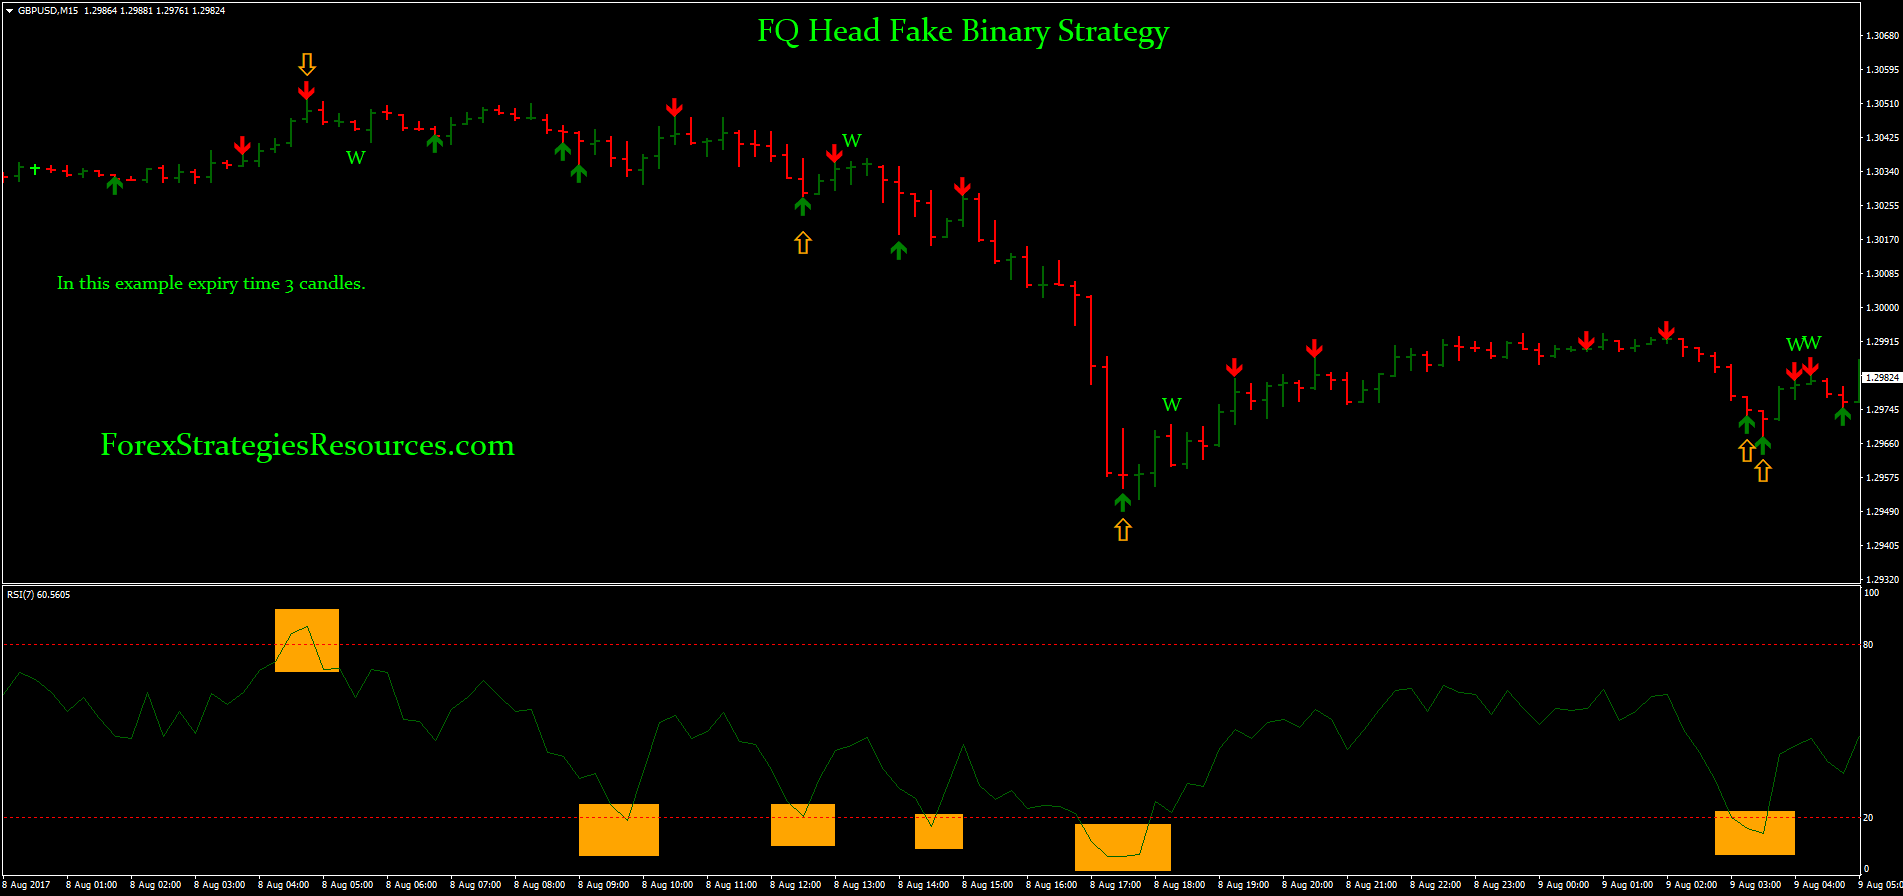 Forex strategy resources binary star normal binary options